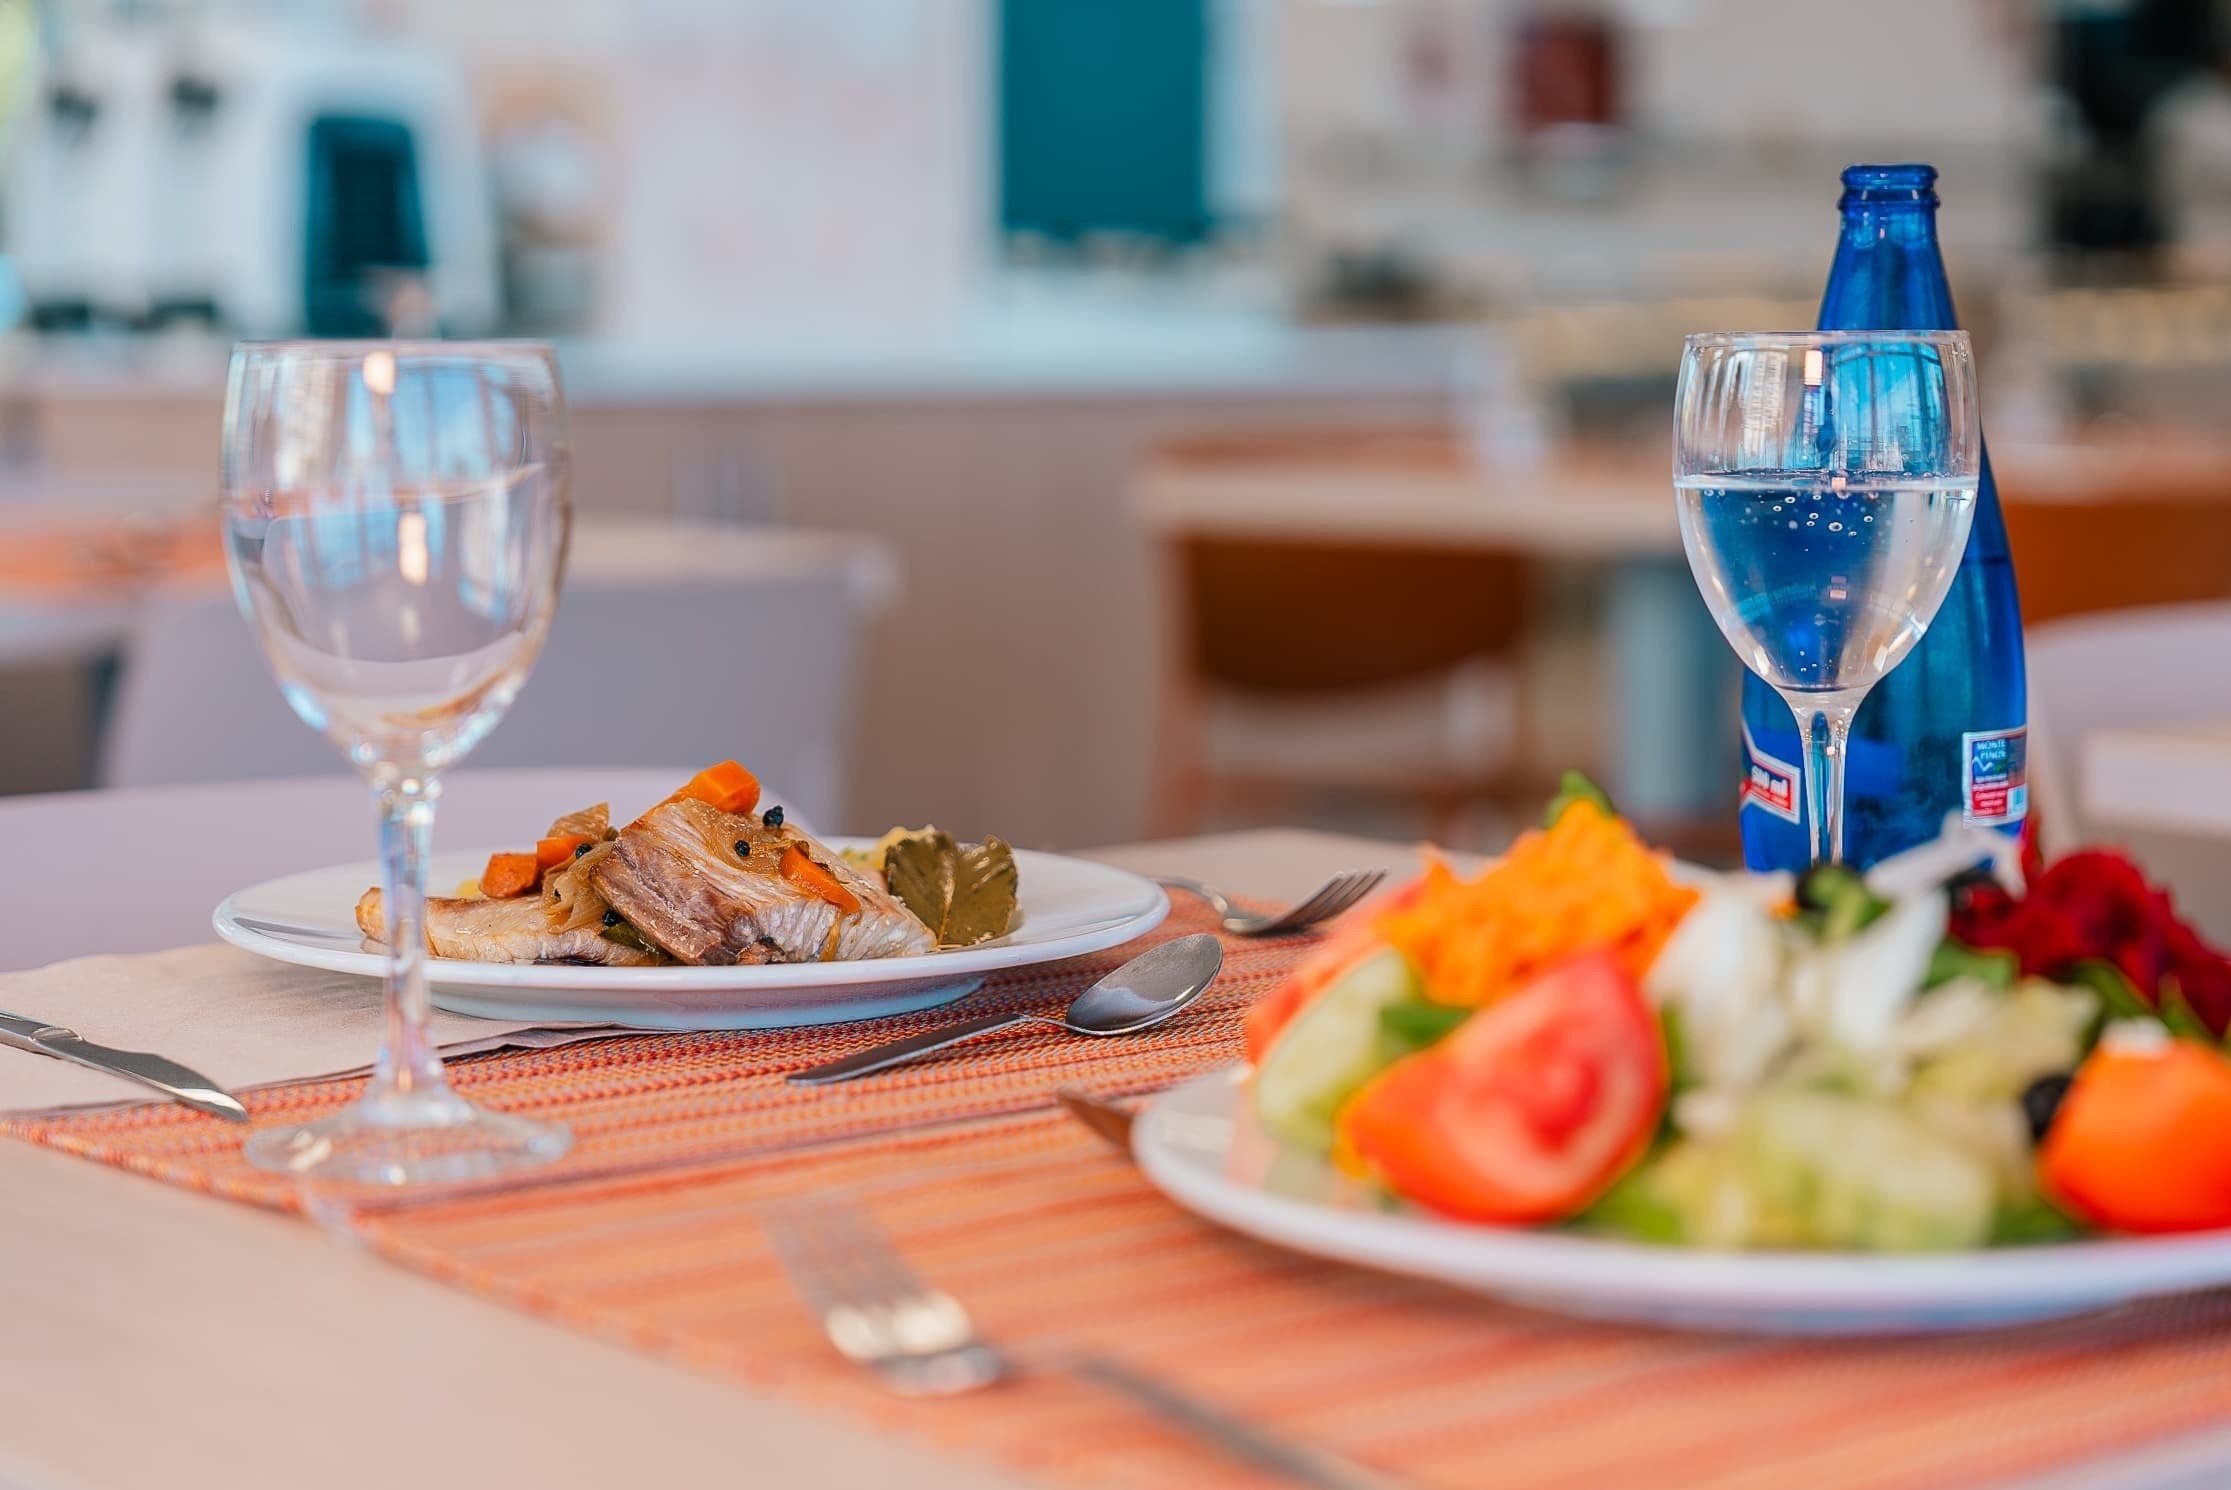 a bottle of aquafina sits on a table next to a plate of food